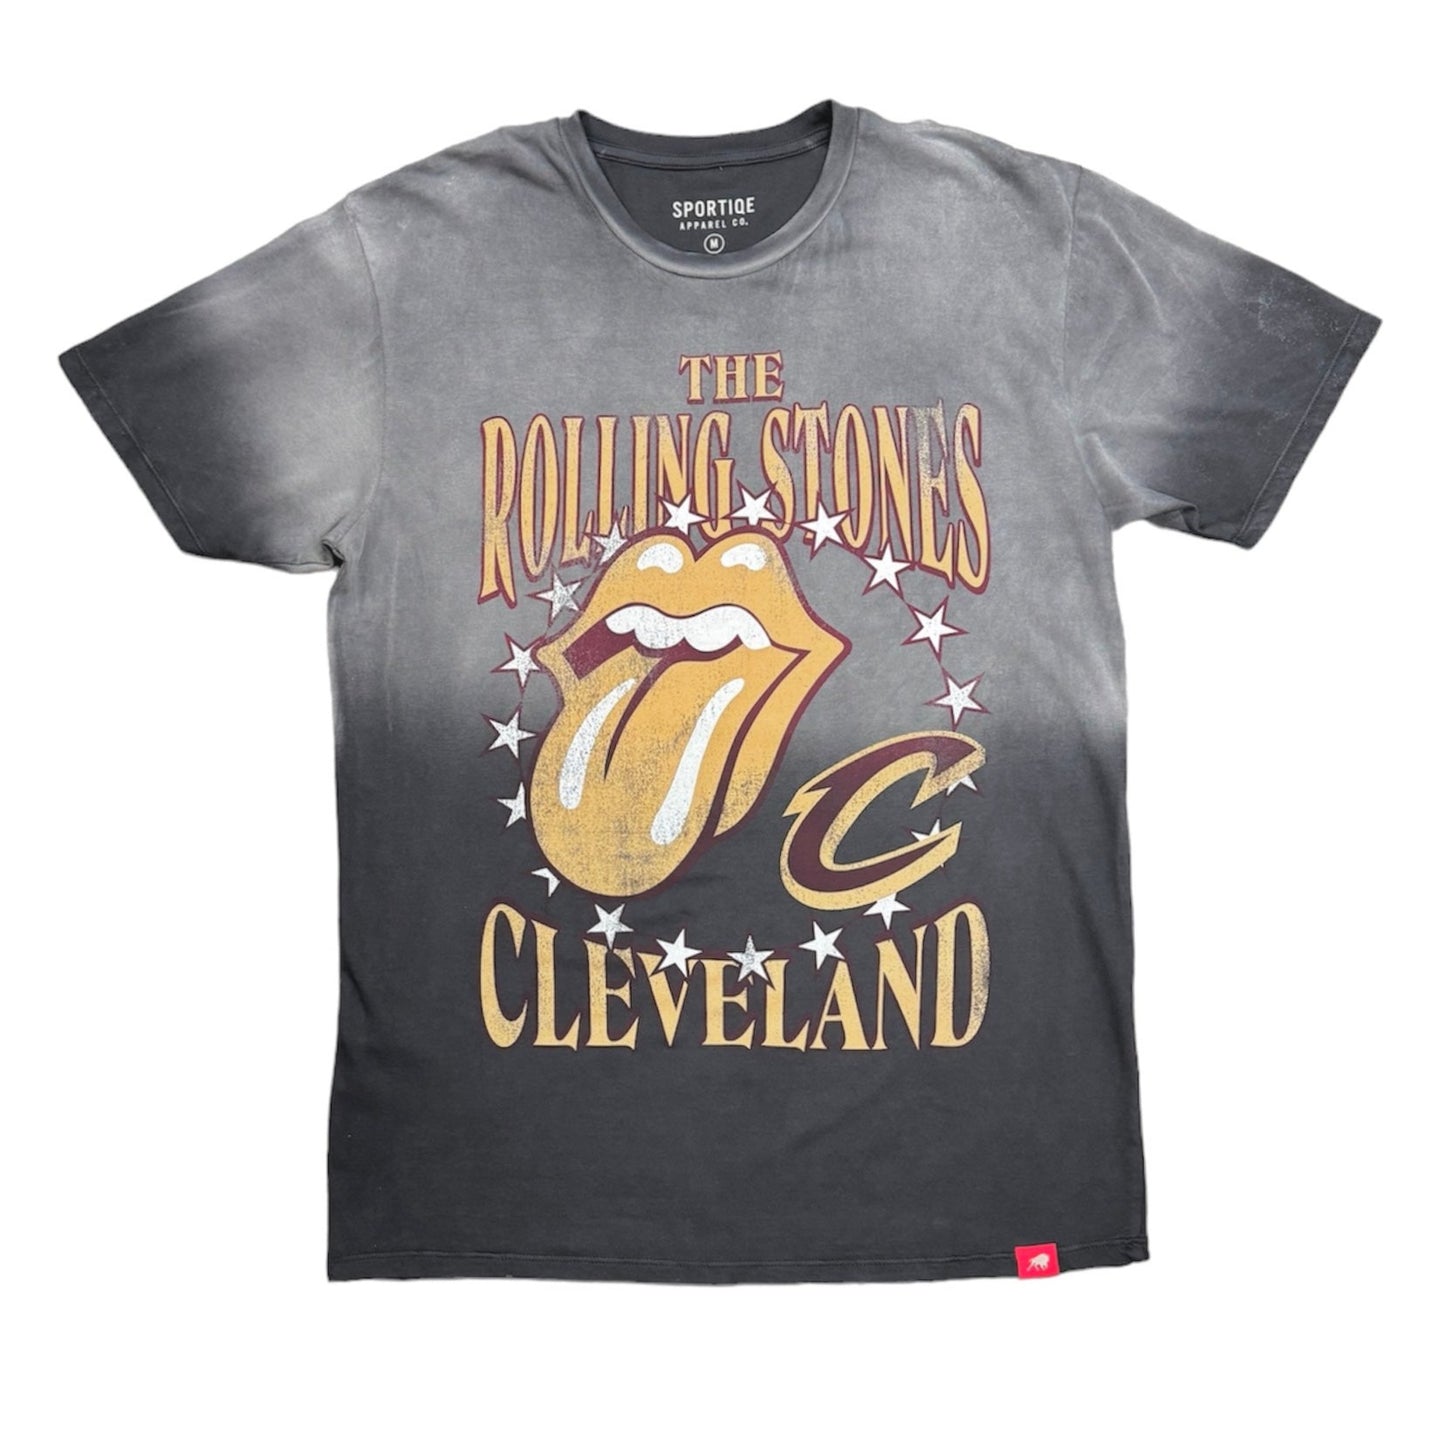 ROLLING STONES x CLEVELAND CAVALIERS - TONGUE T-SHIRT